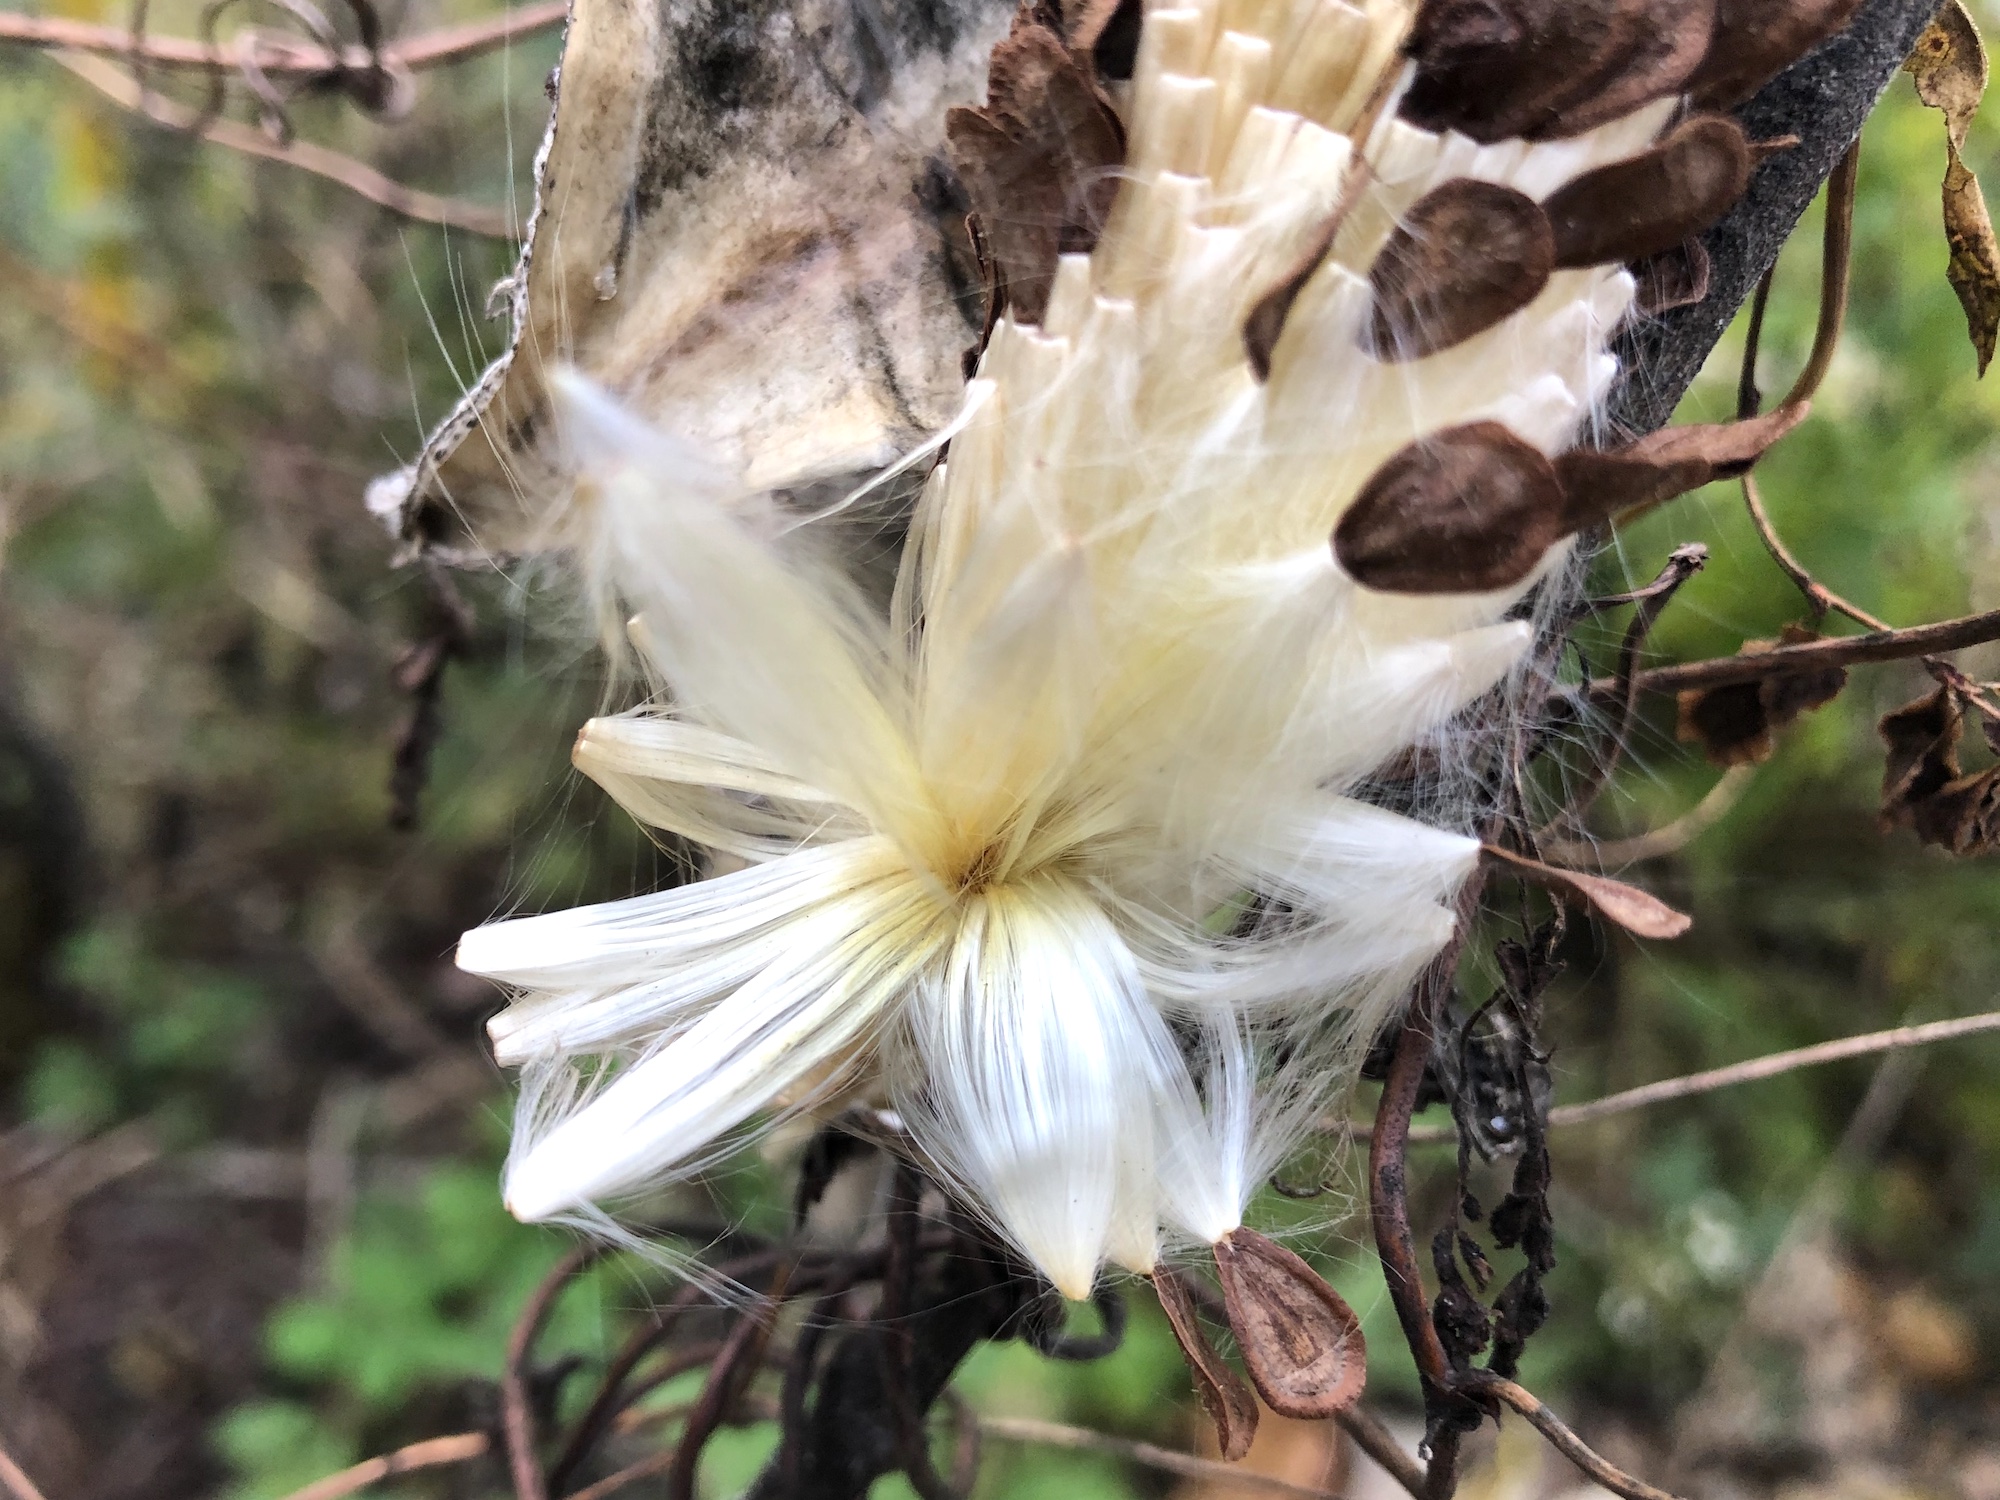 Common Milkweed by Wingra Boats on October 17, 2019.